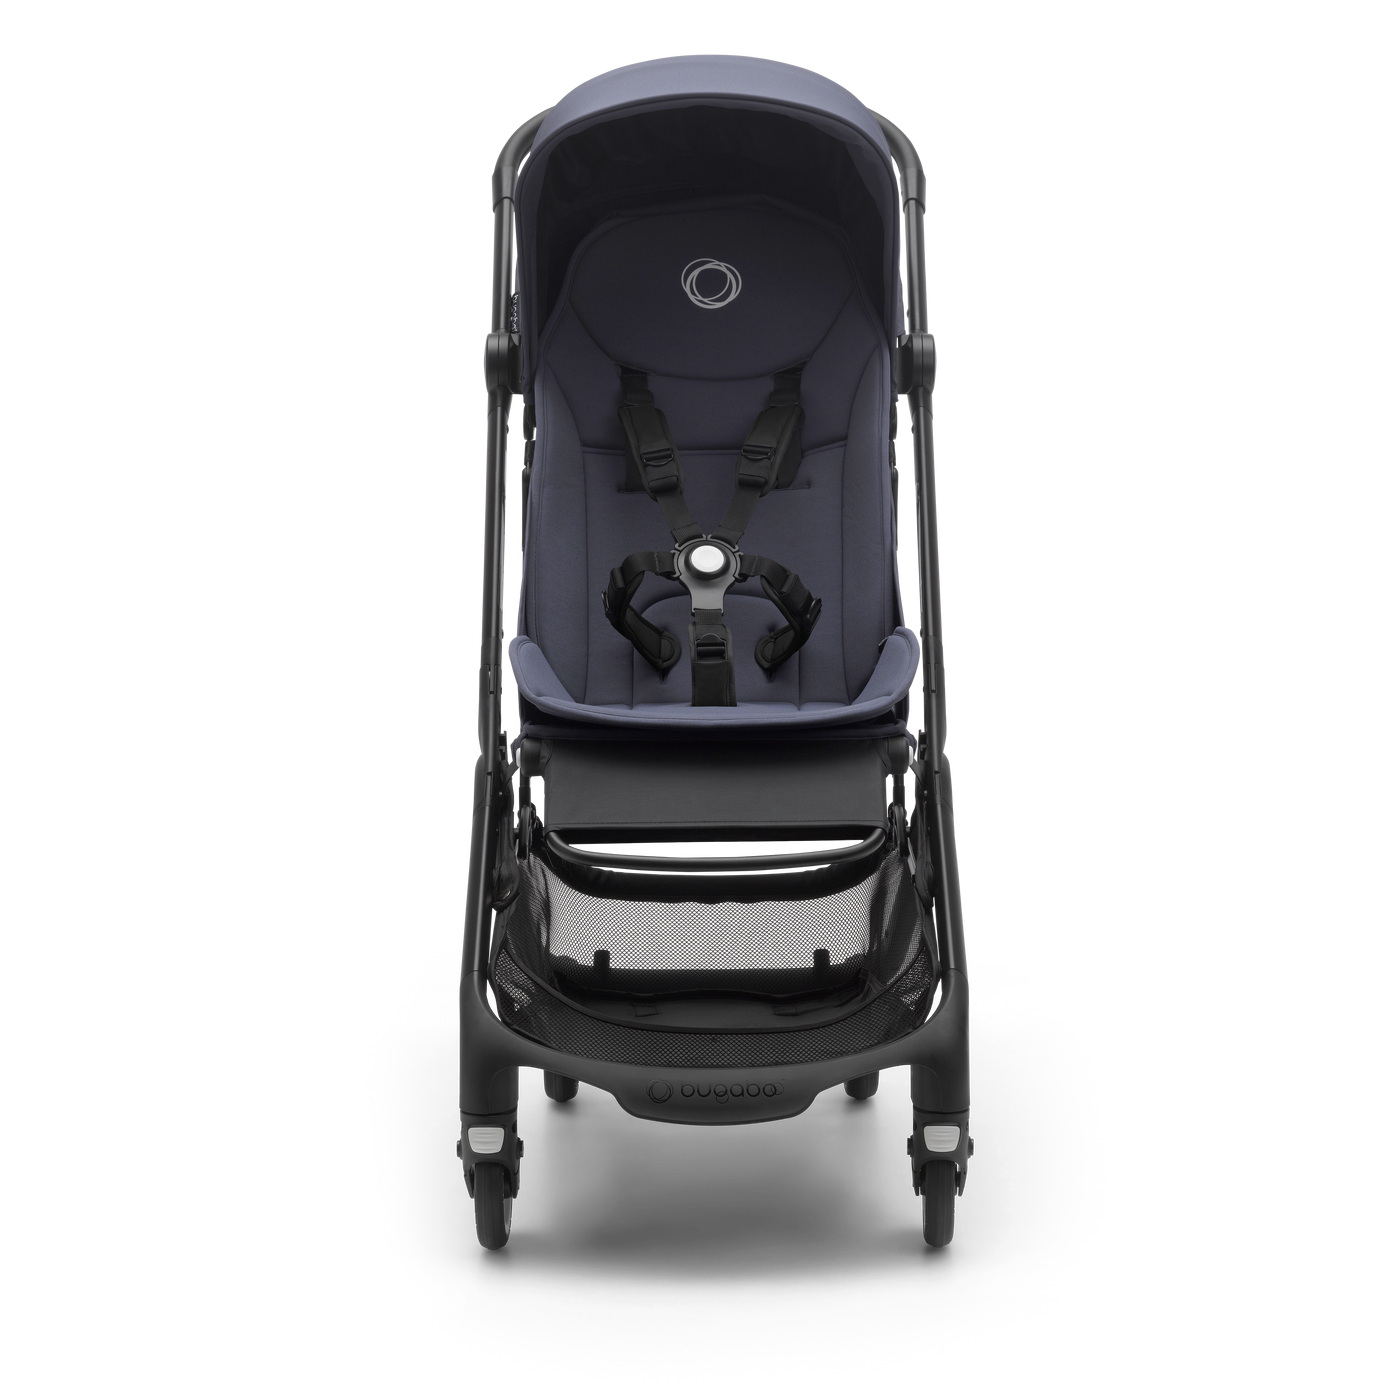 Bugaboo Butterfly Stormy Blue + Turtle Air Travel System